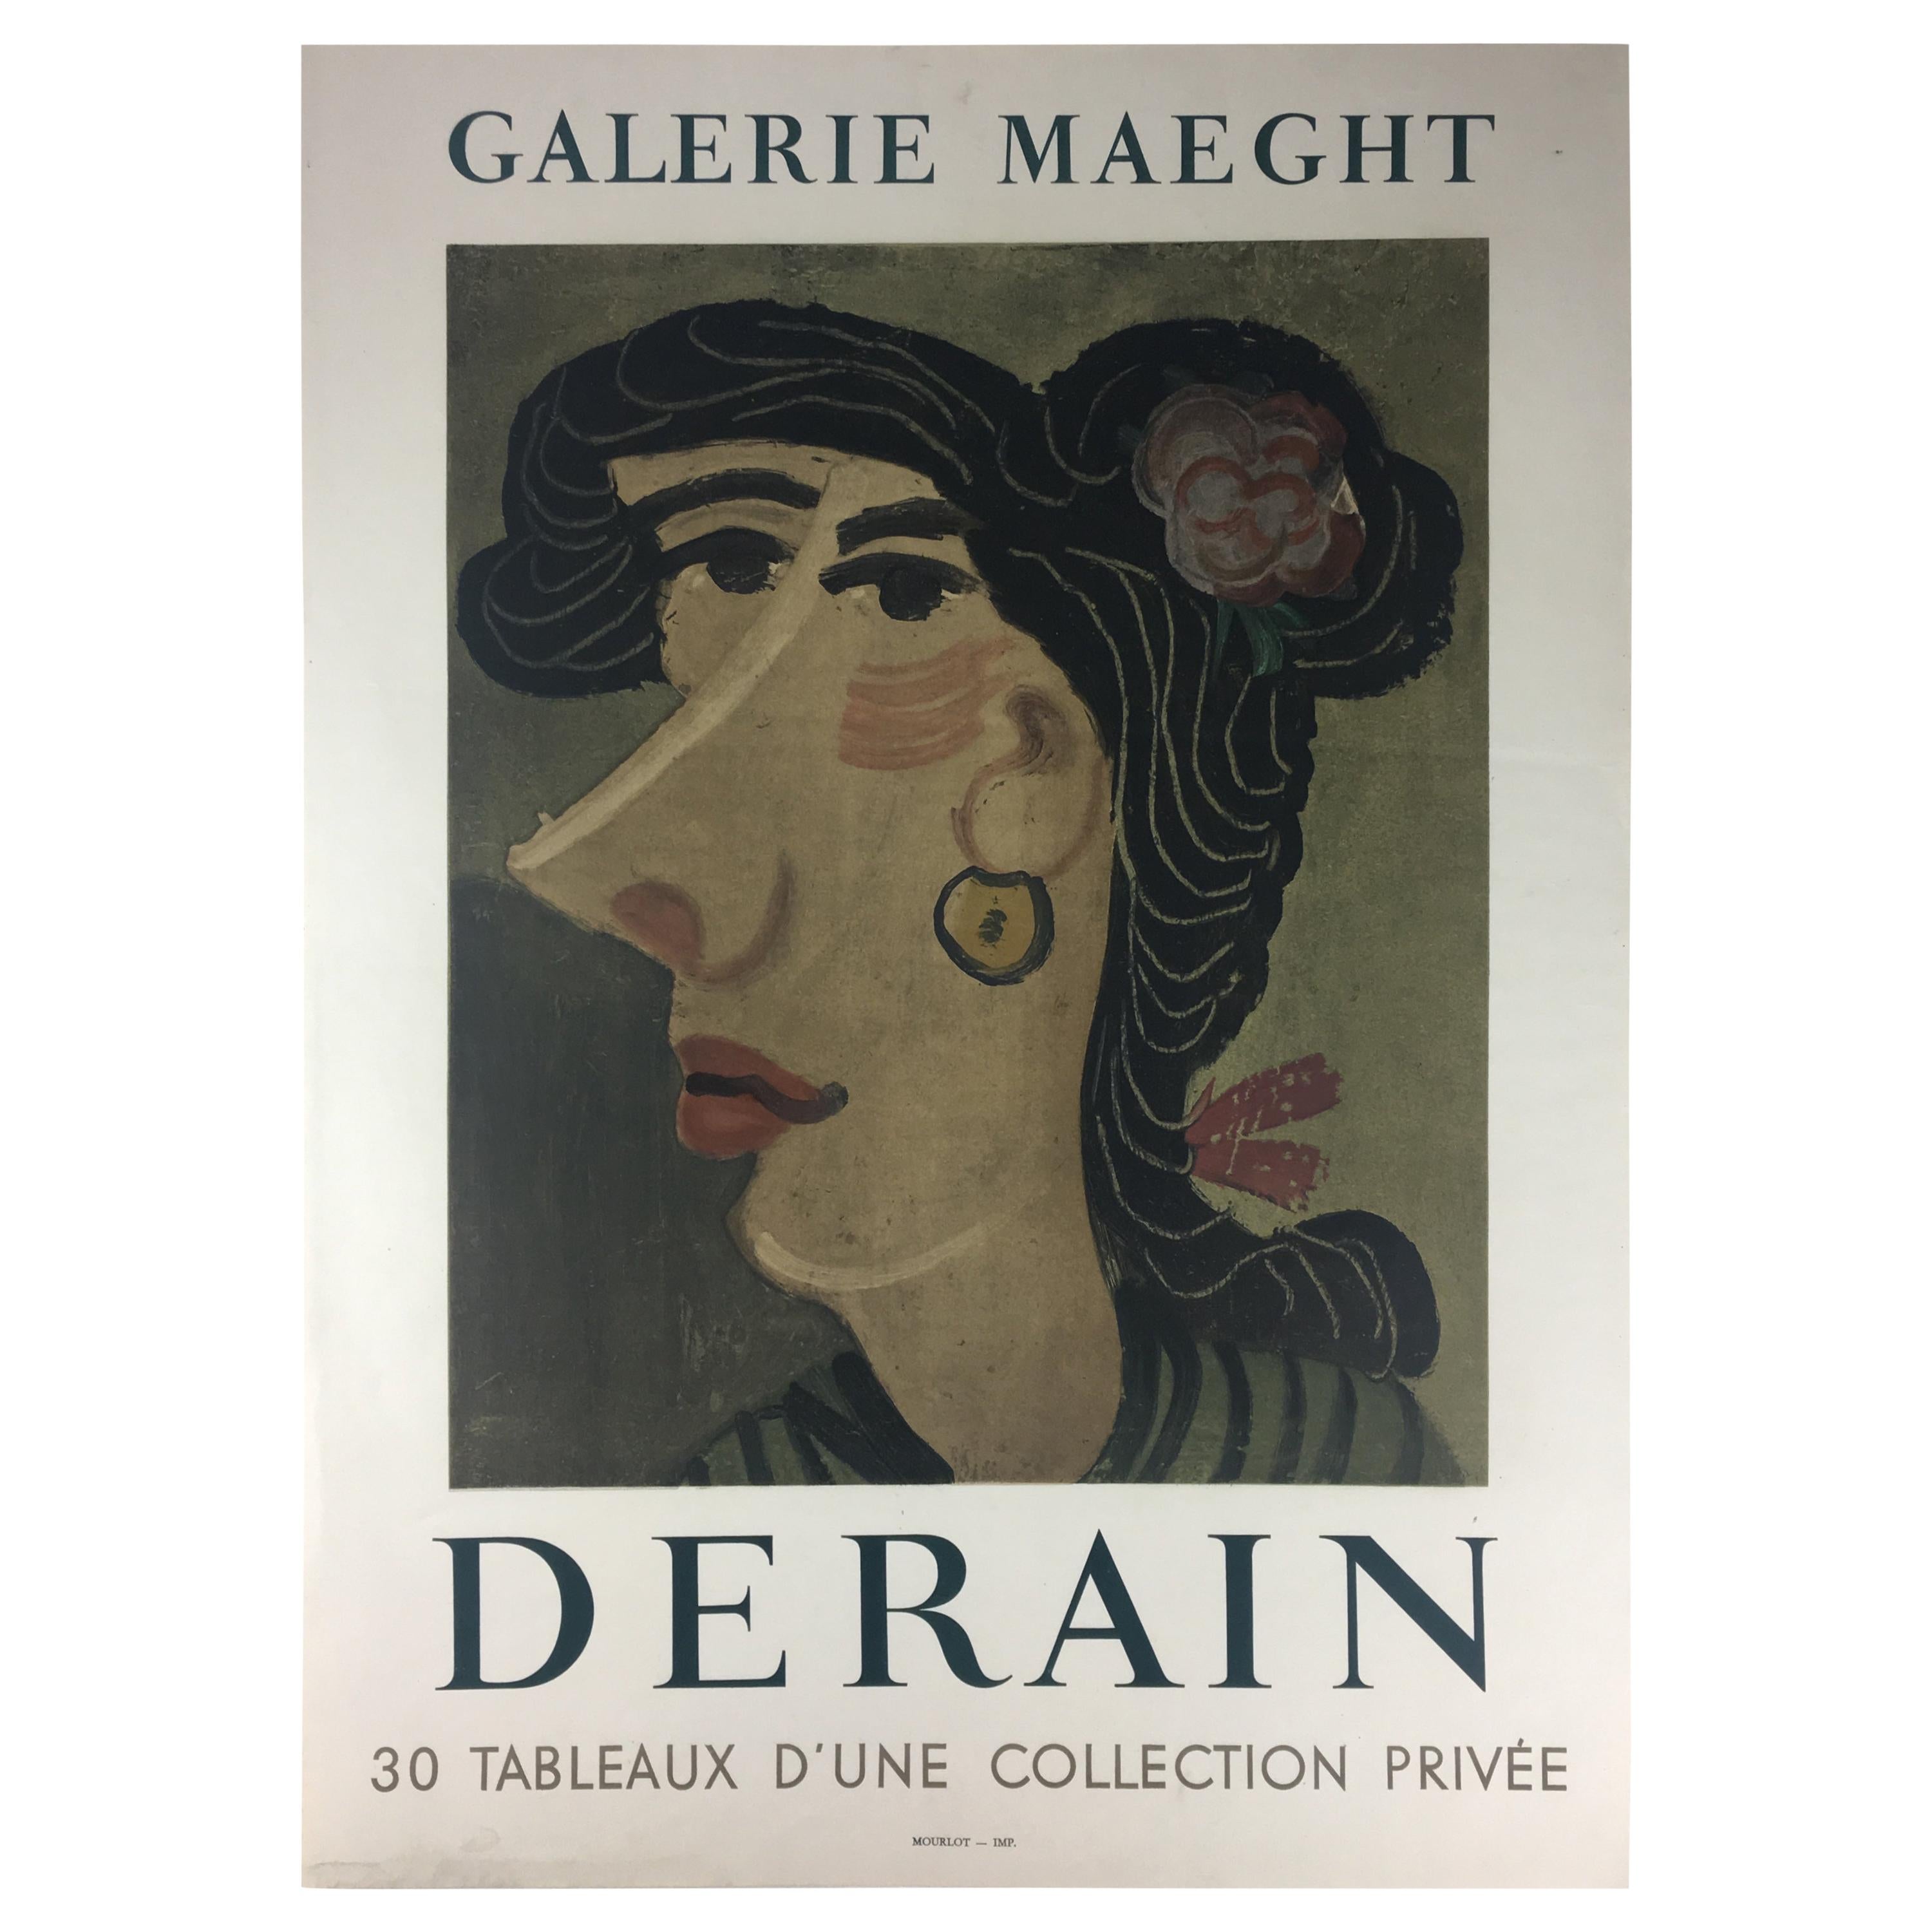 Galerie Maeght Mourlot Art Exhibition Poster, work by Andre Derain 